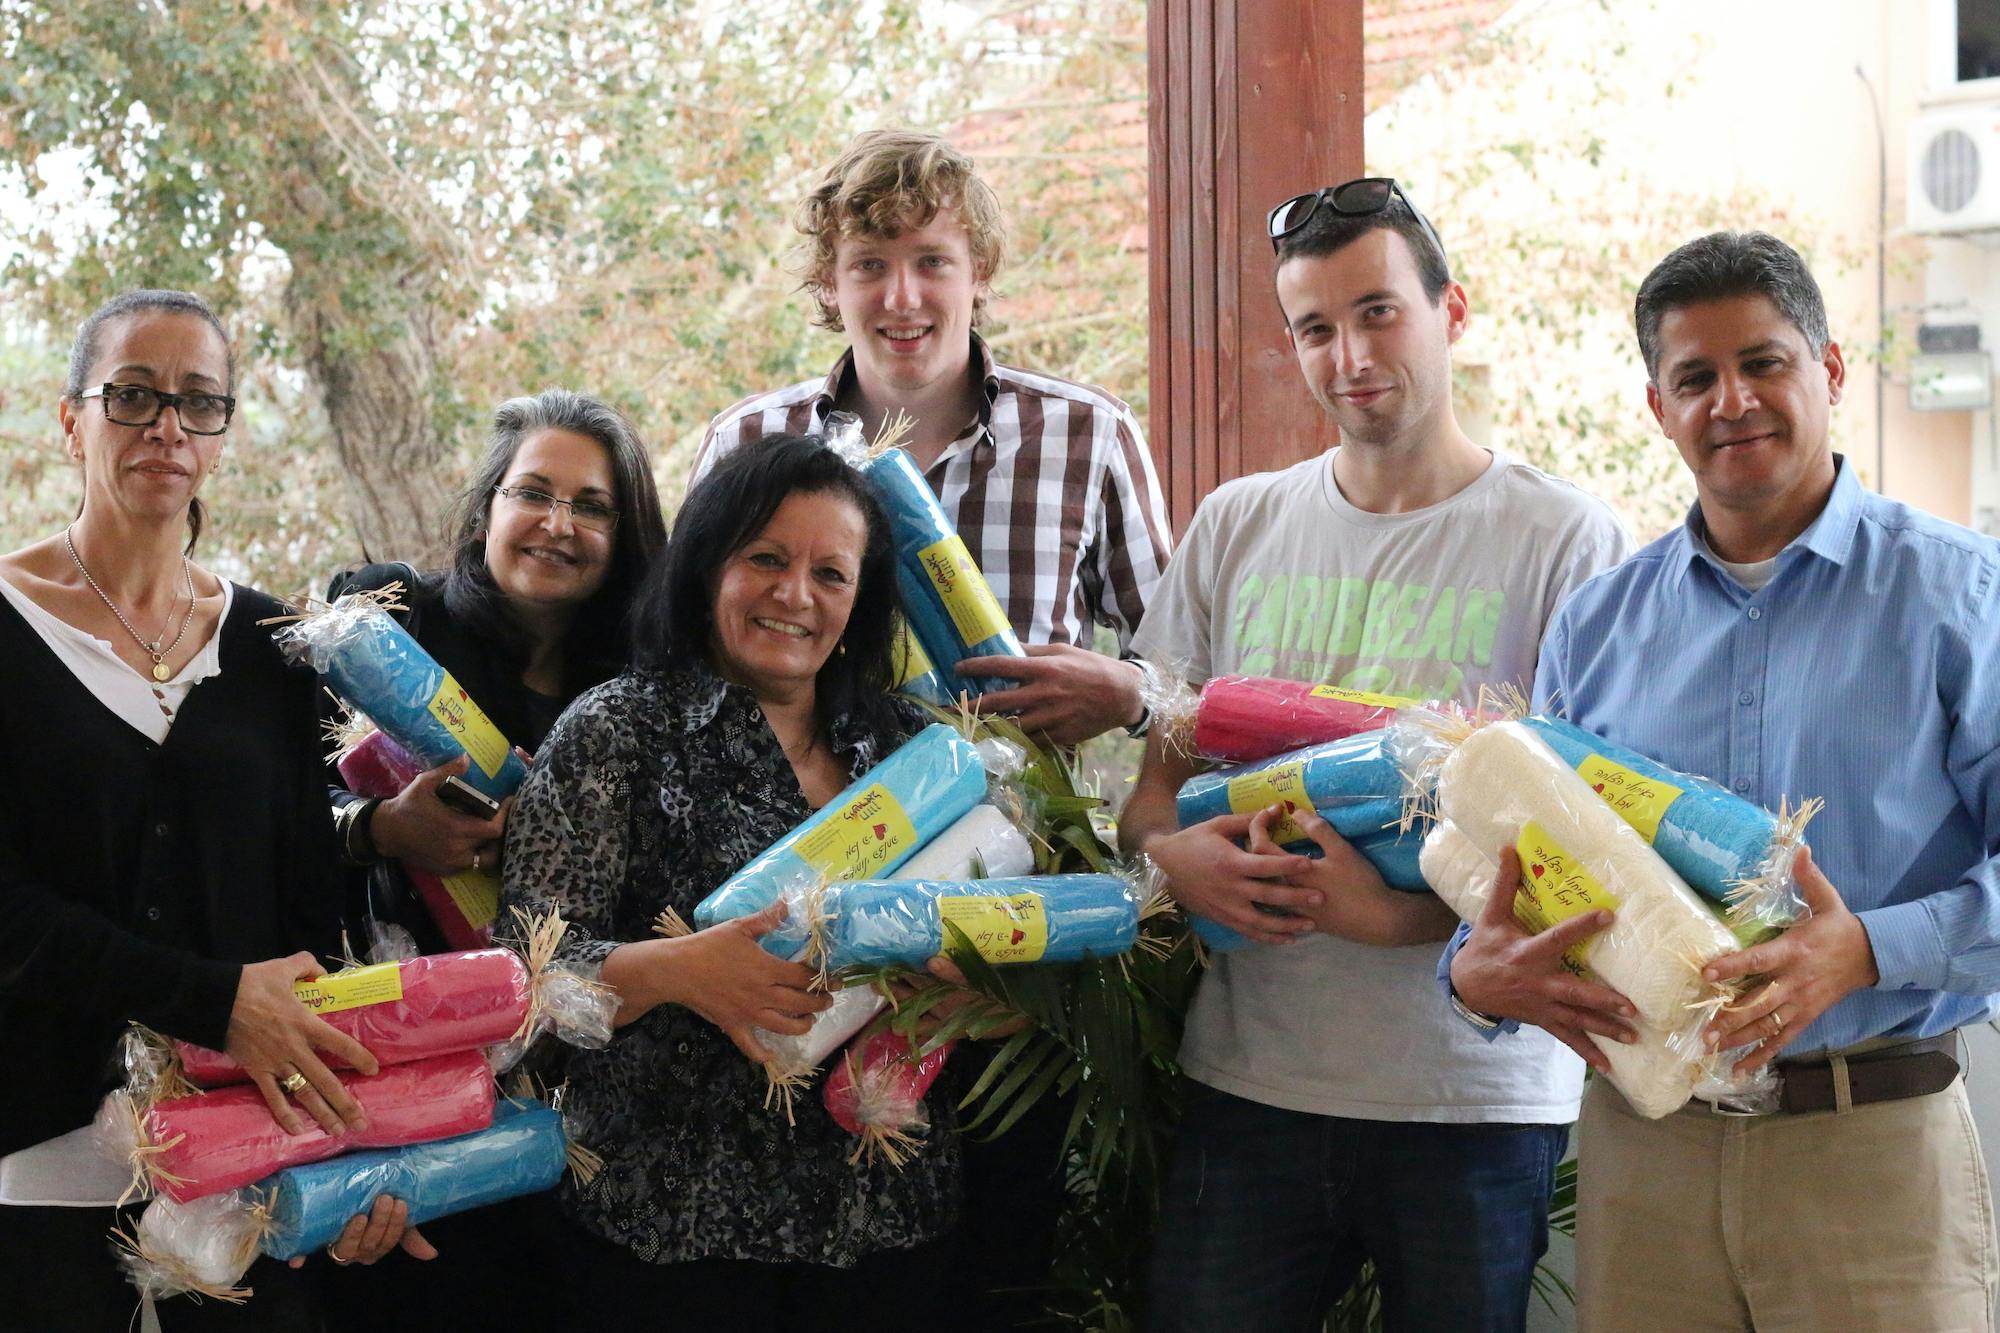 Towels for children at risk at a foster home